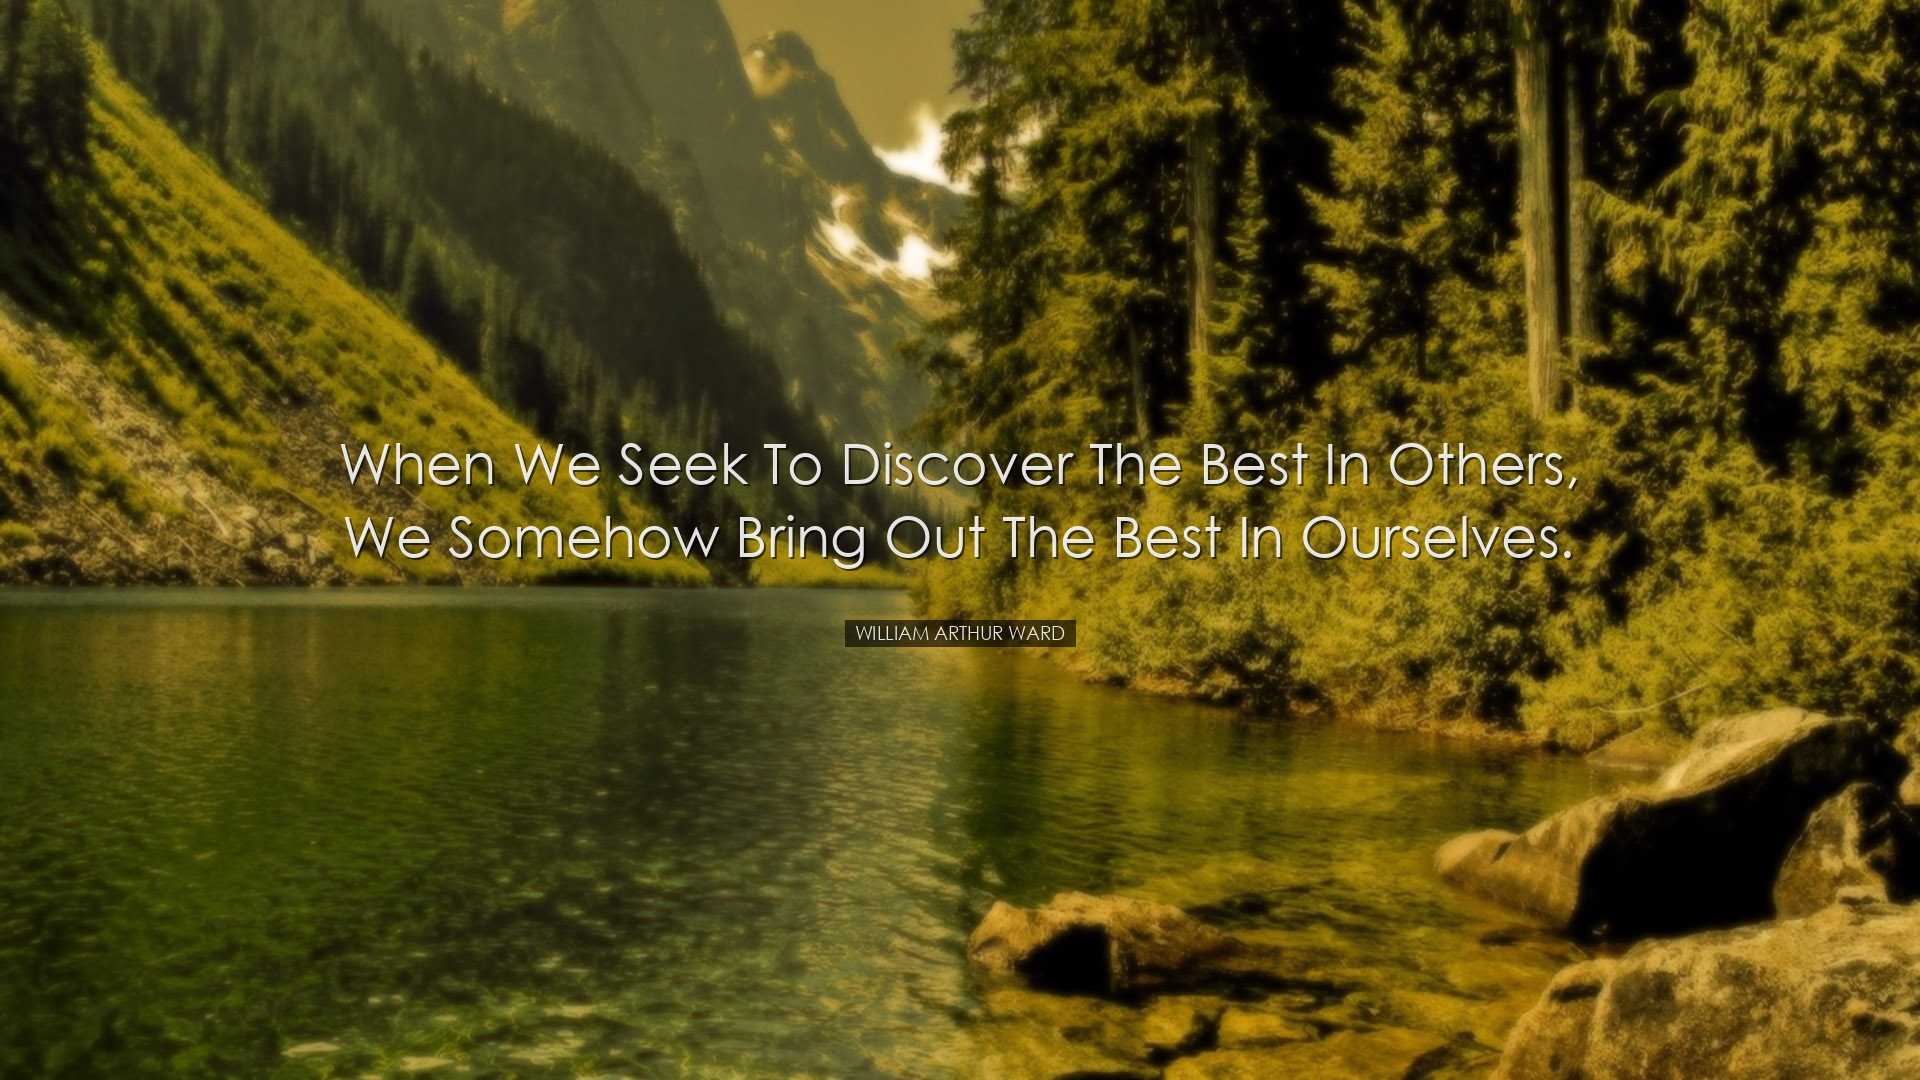 When we seek to discover the best in others, we somehow bring out